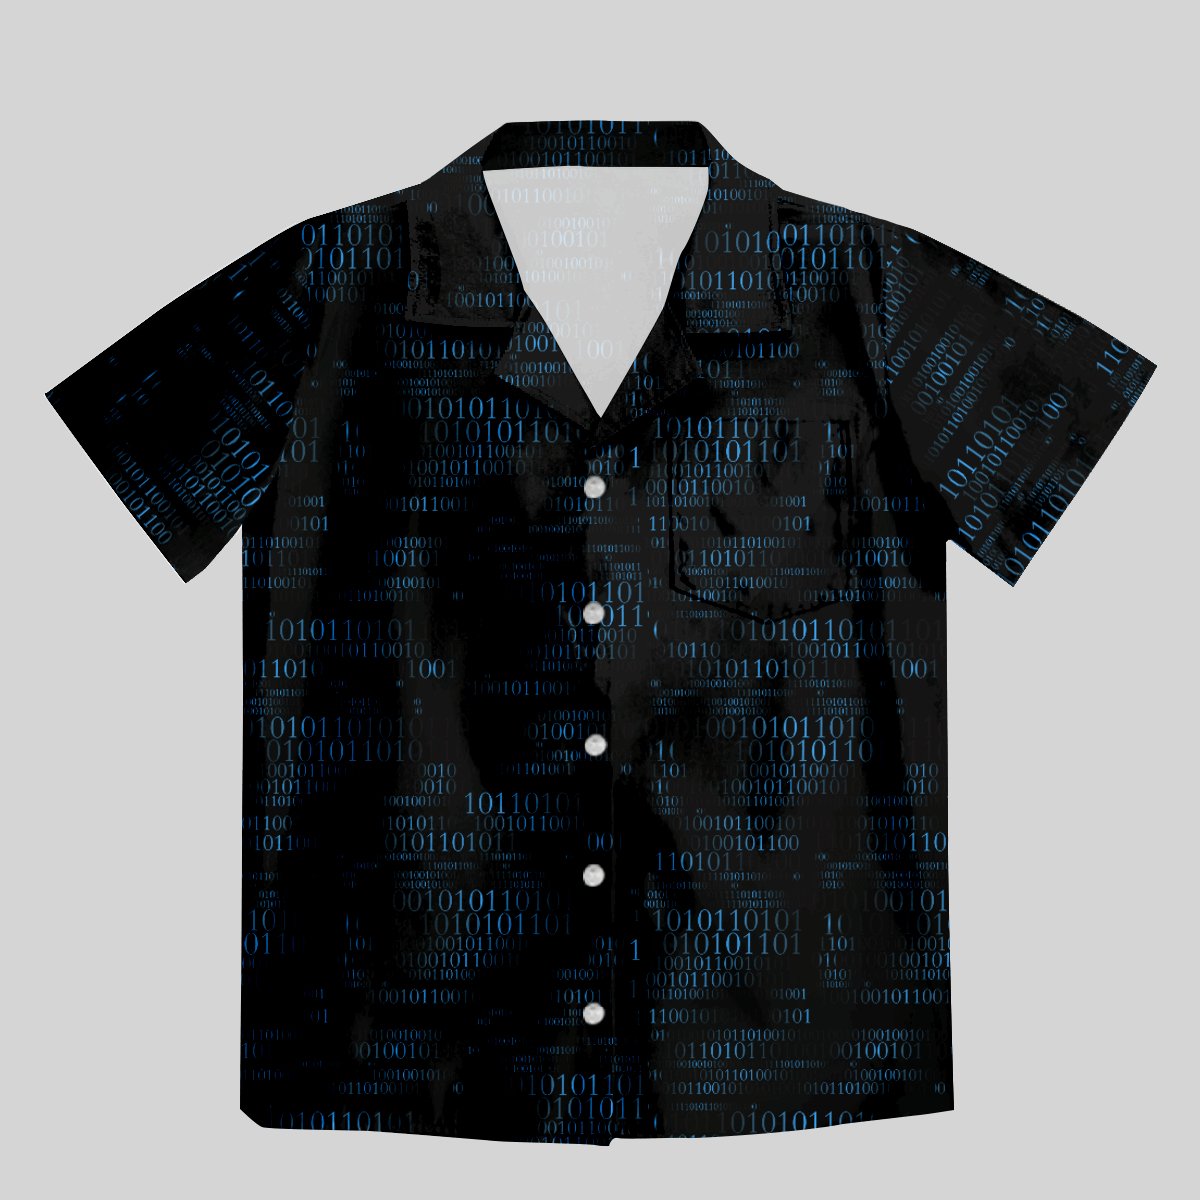 Binary Computer 1s and 0s Black Button Up Pocket Shirt - Geeksoutfit